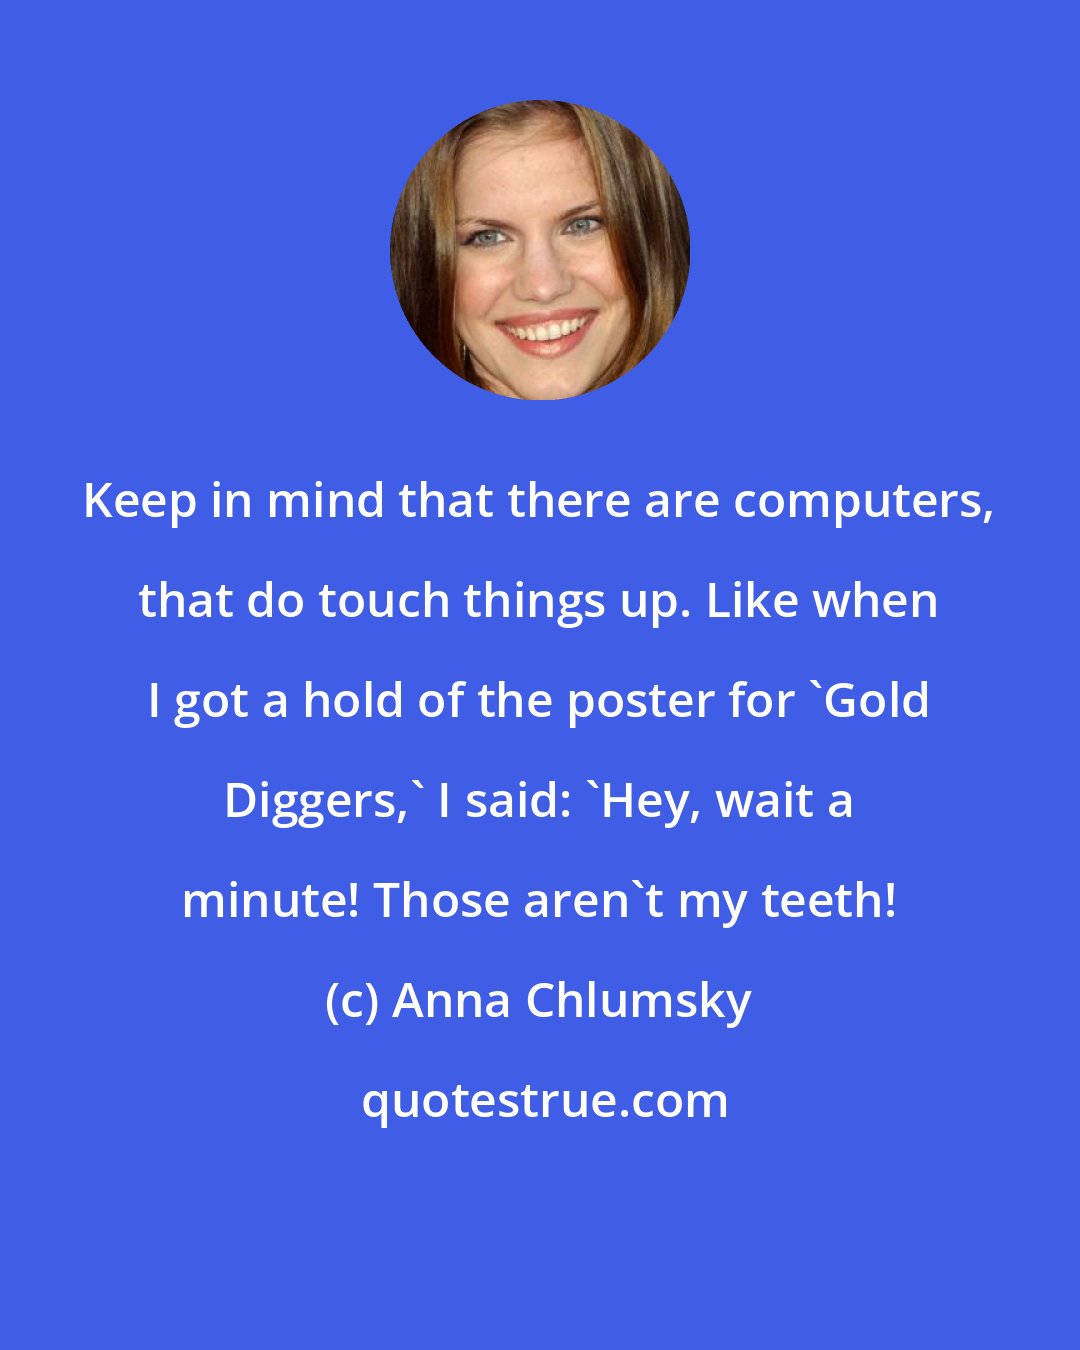 Anna Chlumsky: Keep in mind that there are computers, that do touch things up. Like when I got a hold of the poster for 'Gold Diggers,' I said: 'Hey, wait a minute! Those aren't my teeth!